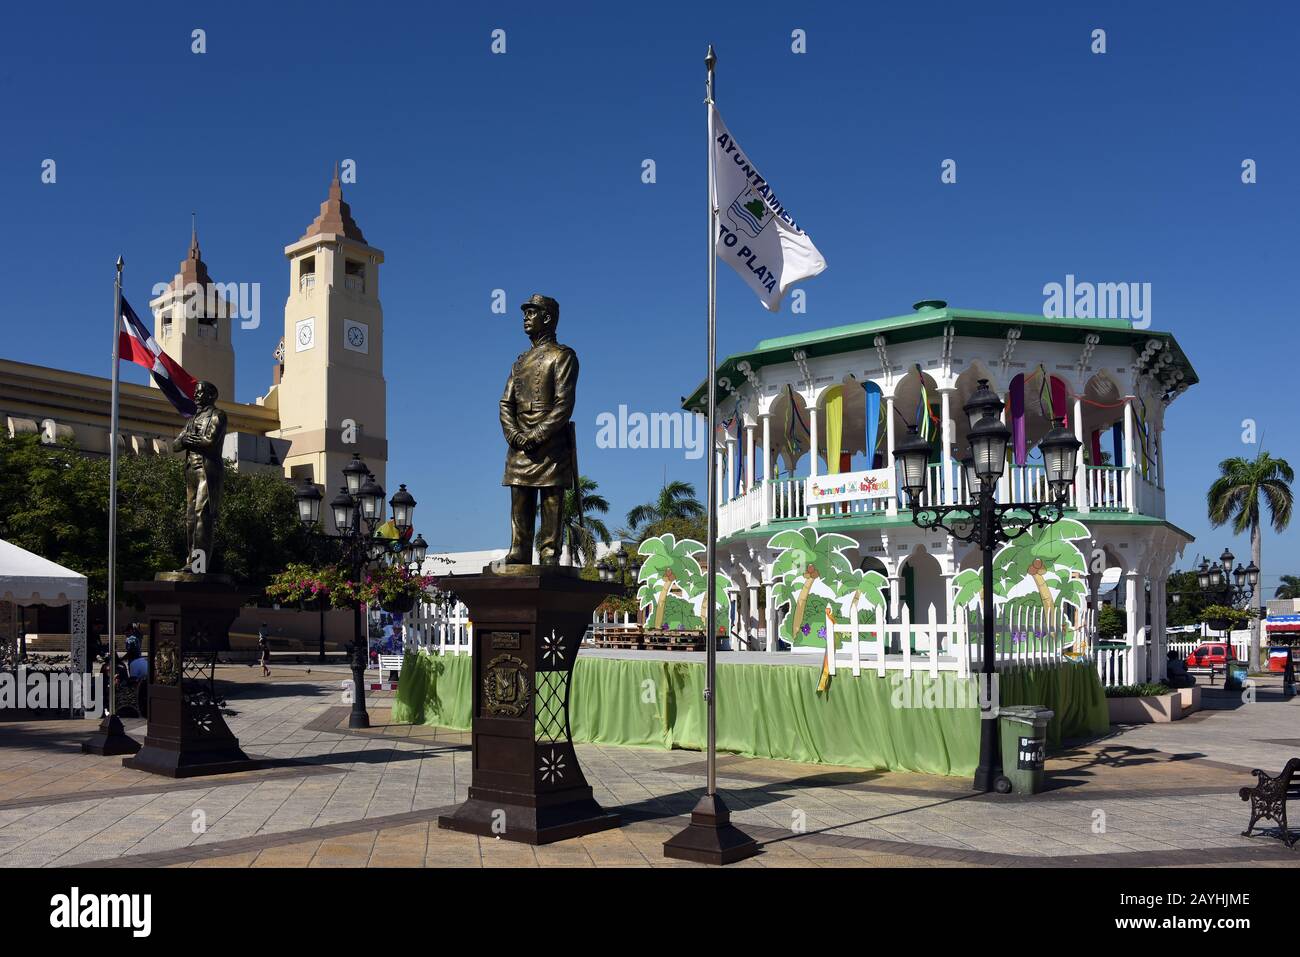 Puerto Plata, Dominican Republic - February 7, 2020:  The Central Park in Puerto Plata is an important tourist attraction in a country that relies hea Stock Photo